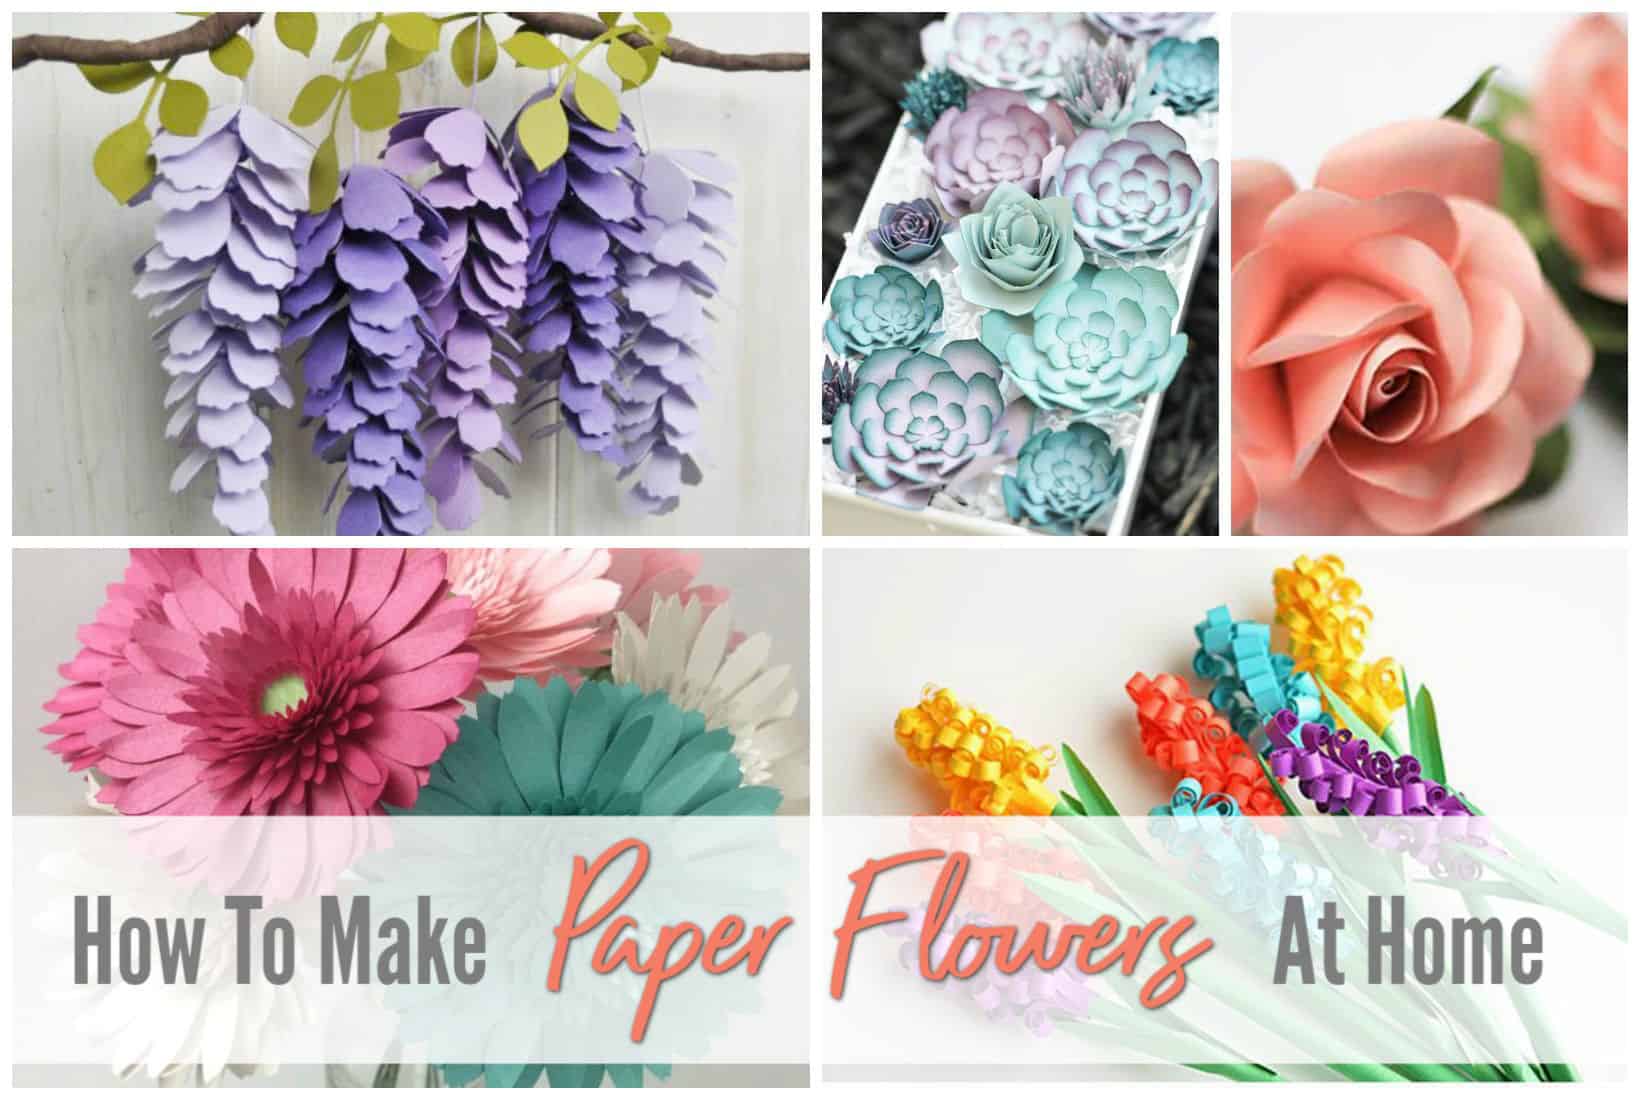 Wedding Paper Flowers Tissue Paper Decorations , Flower Wall Backdrop,  Girls Birthday Party, Baby Shower, Garden Party, Christmas Decor 